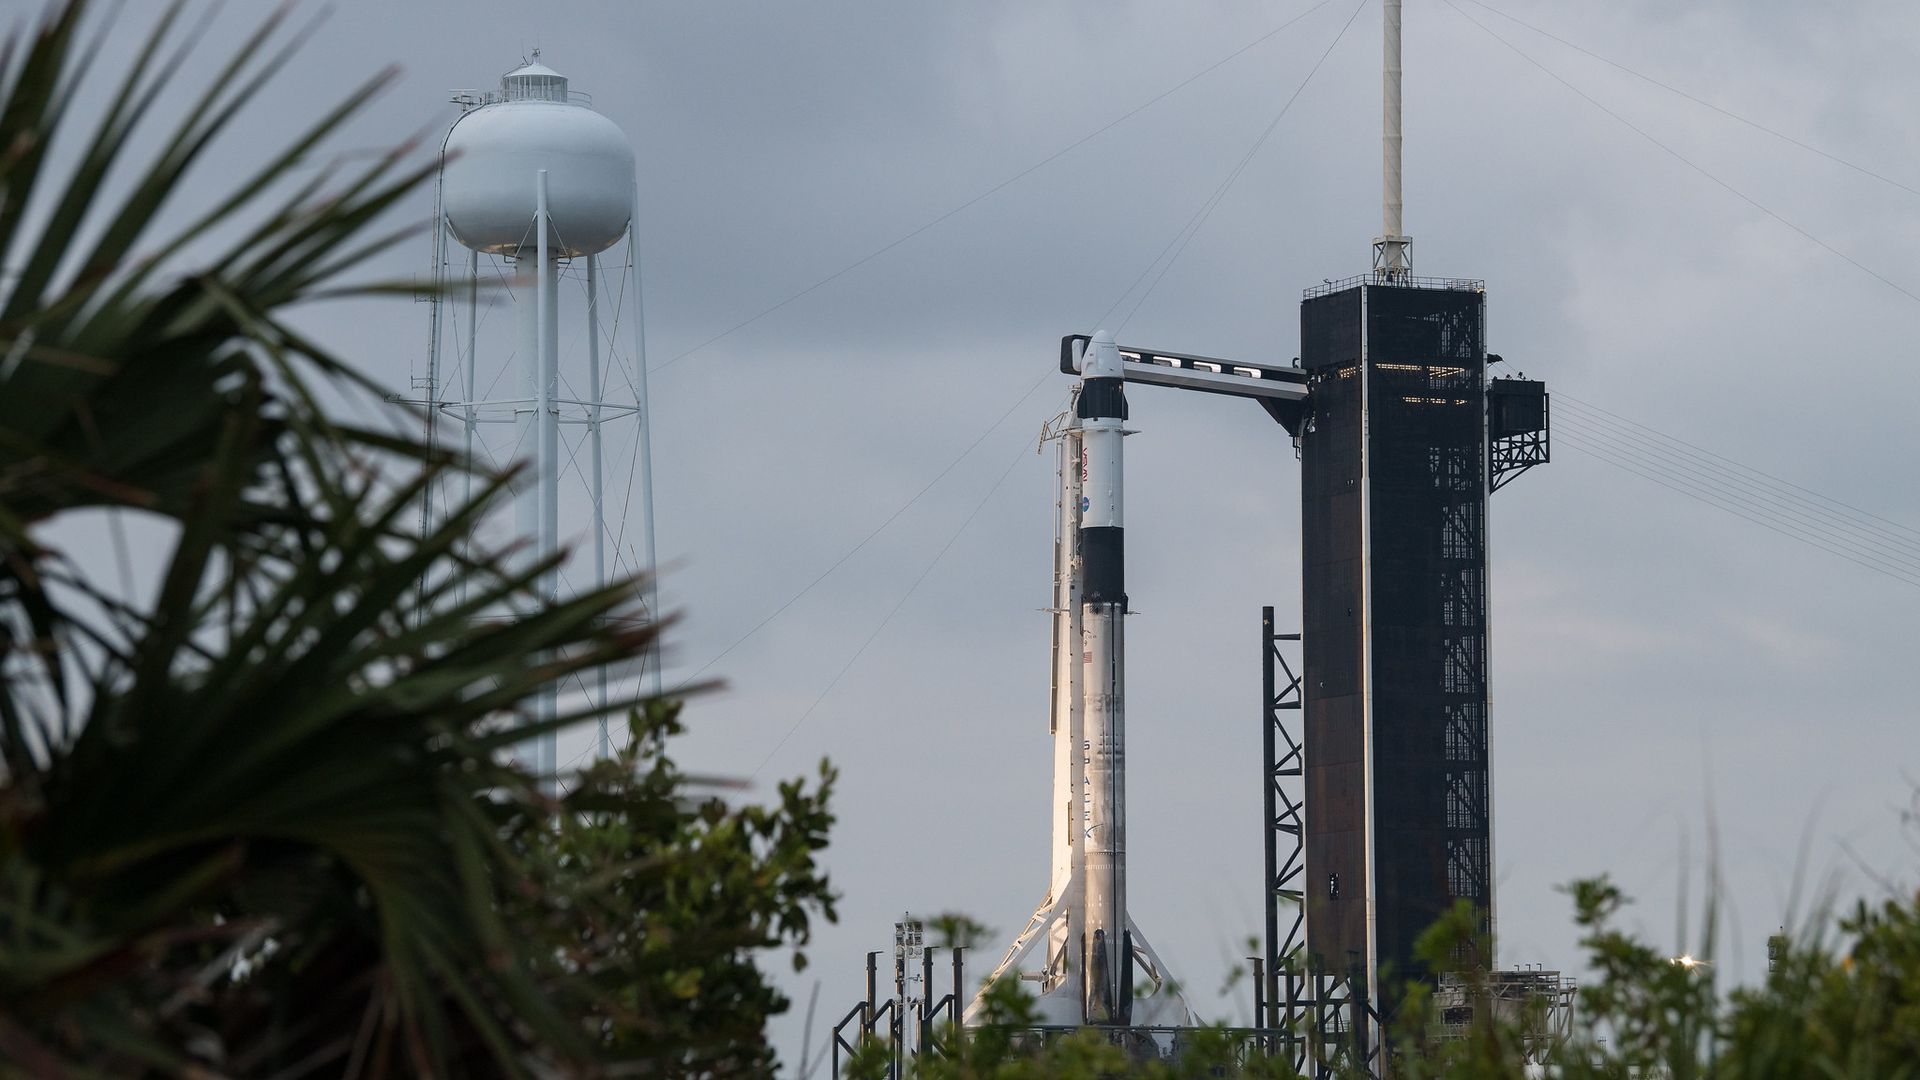 A SpaceX rocket stands on a pad framed by trees.